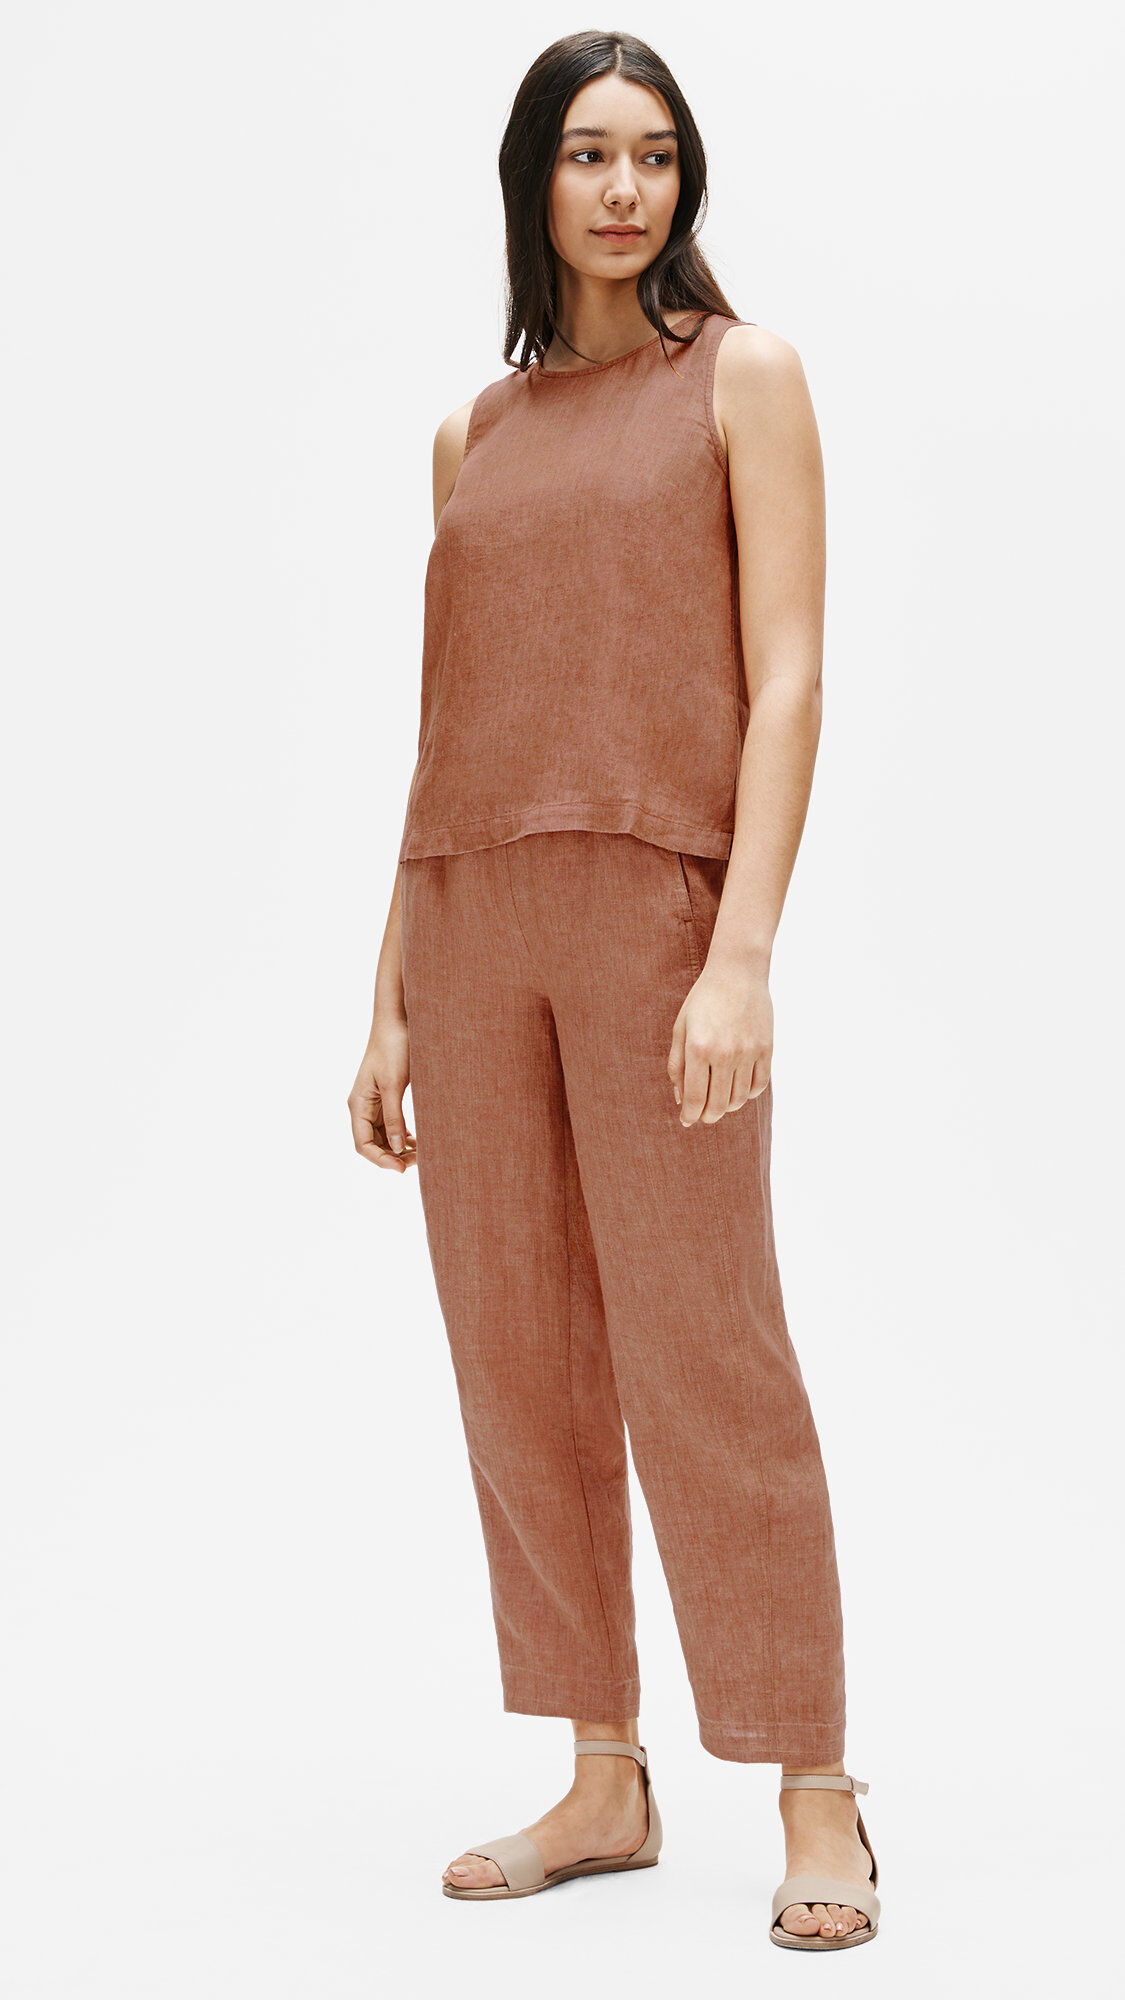 Eileen Fisher Solid Black Jumpsuit - 21% Off